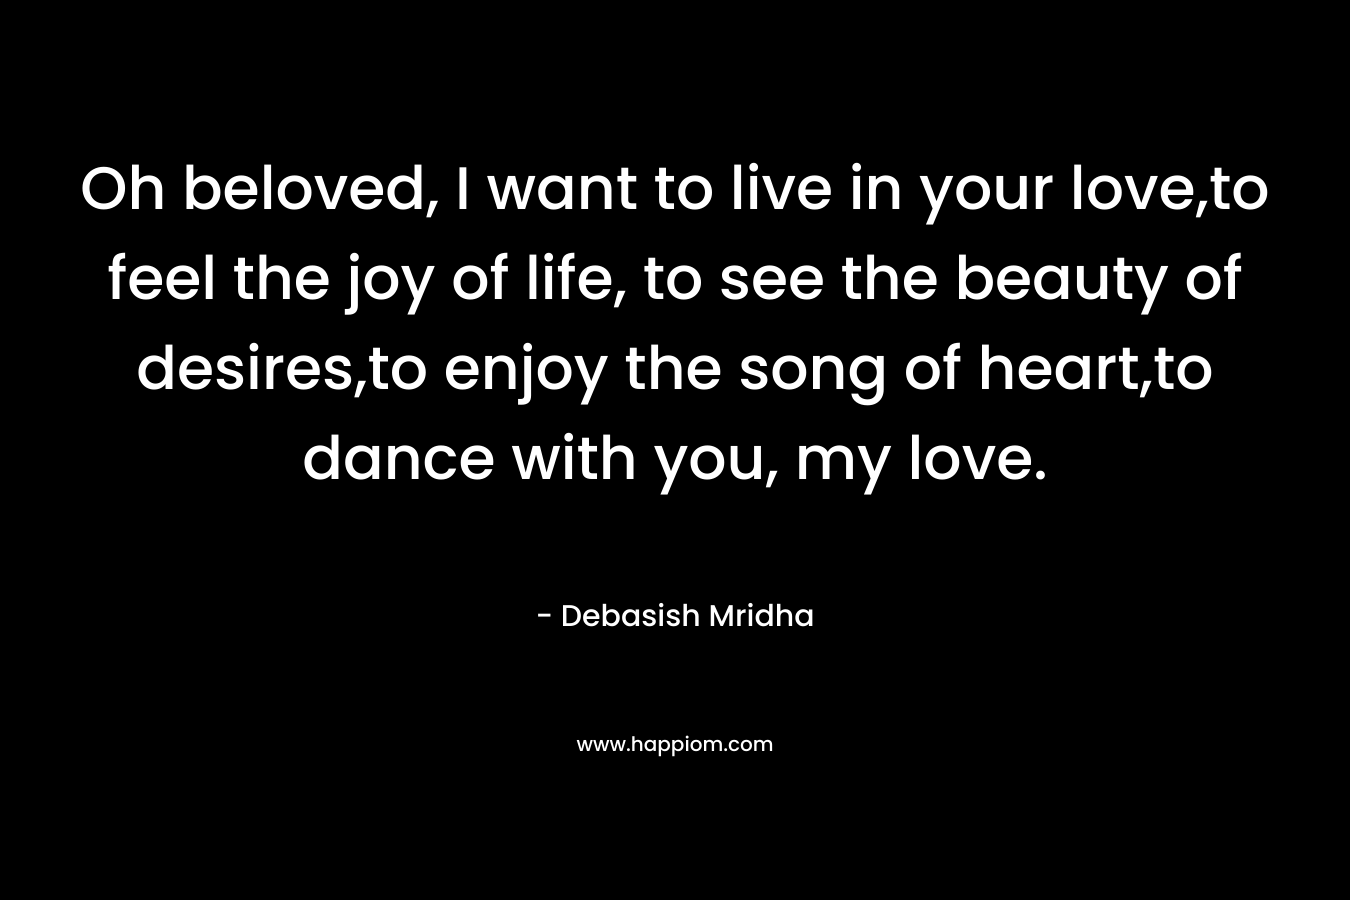 Oh beloved, I want to live in your love,to feel the joy of life, to see the beauty of desires,to enjoy the song of heart,to dance with you, my love. – Debasish Mridha